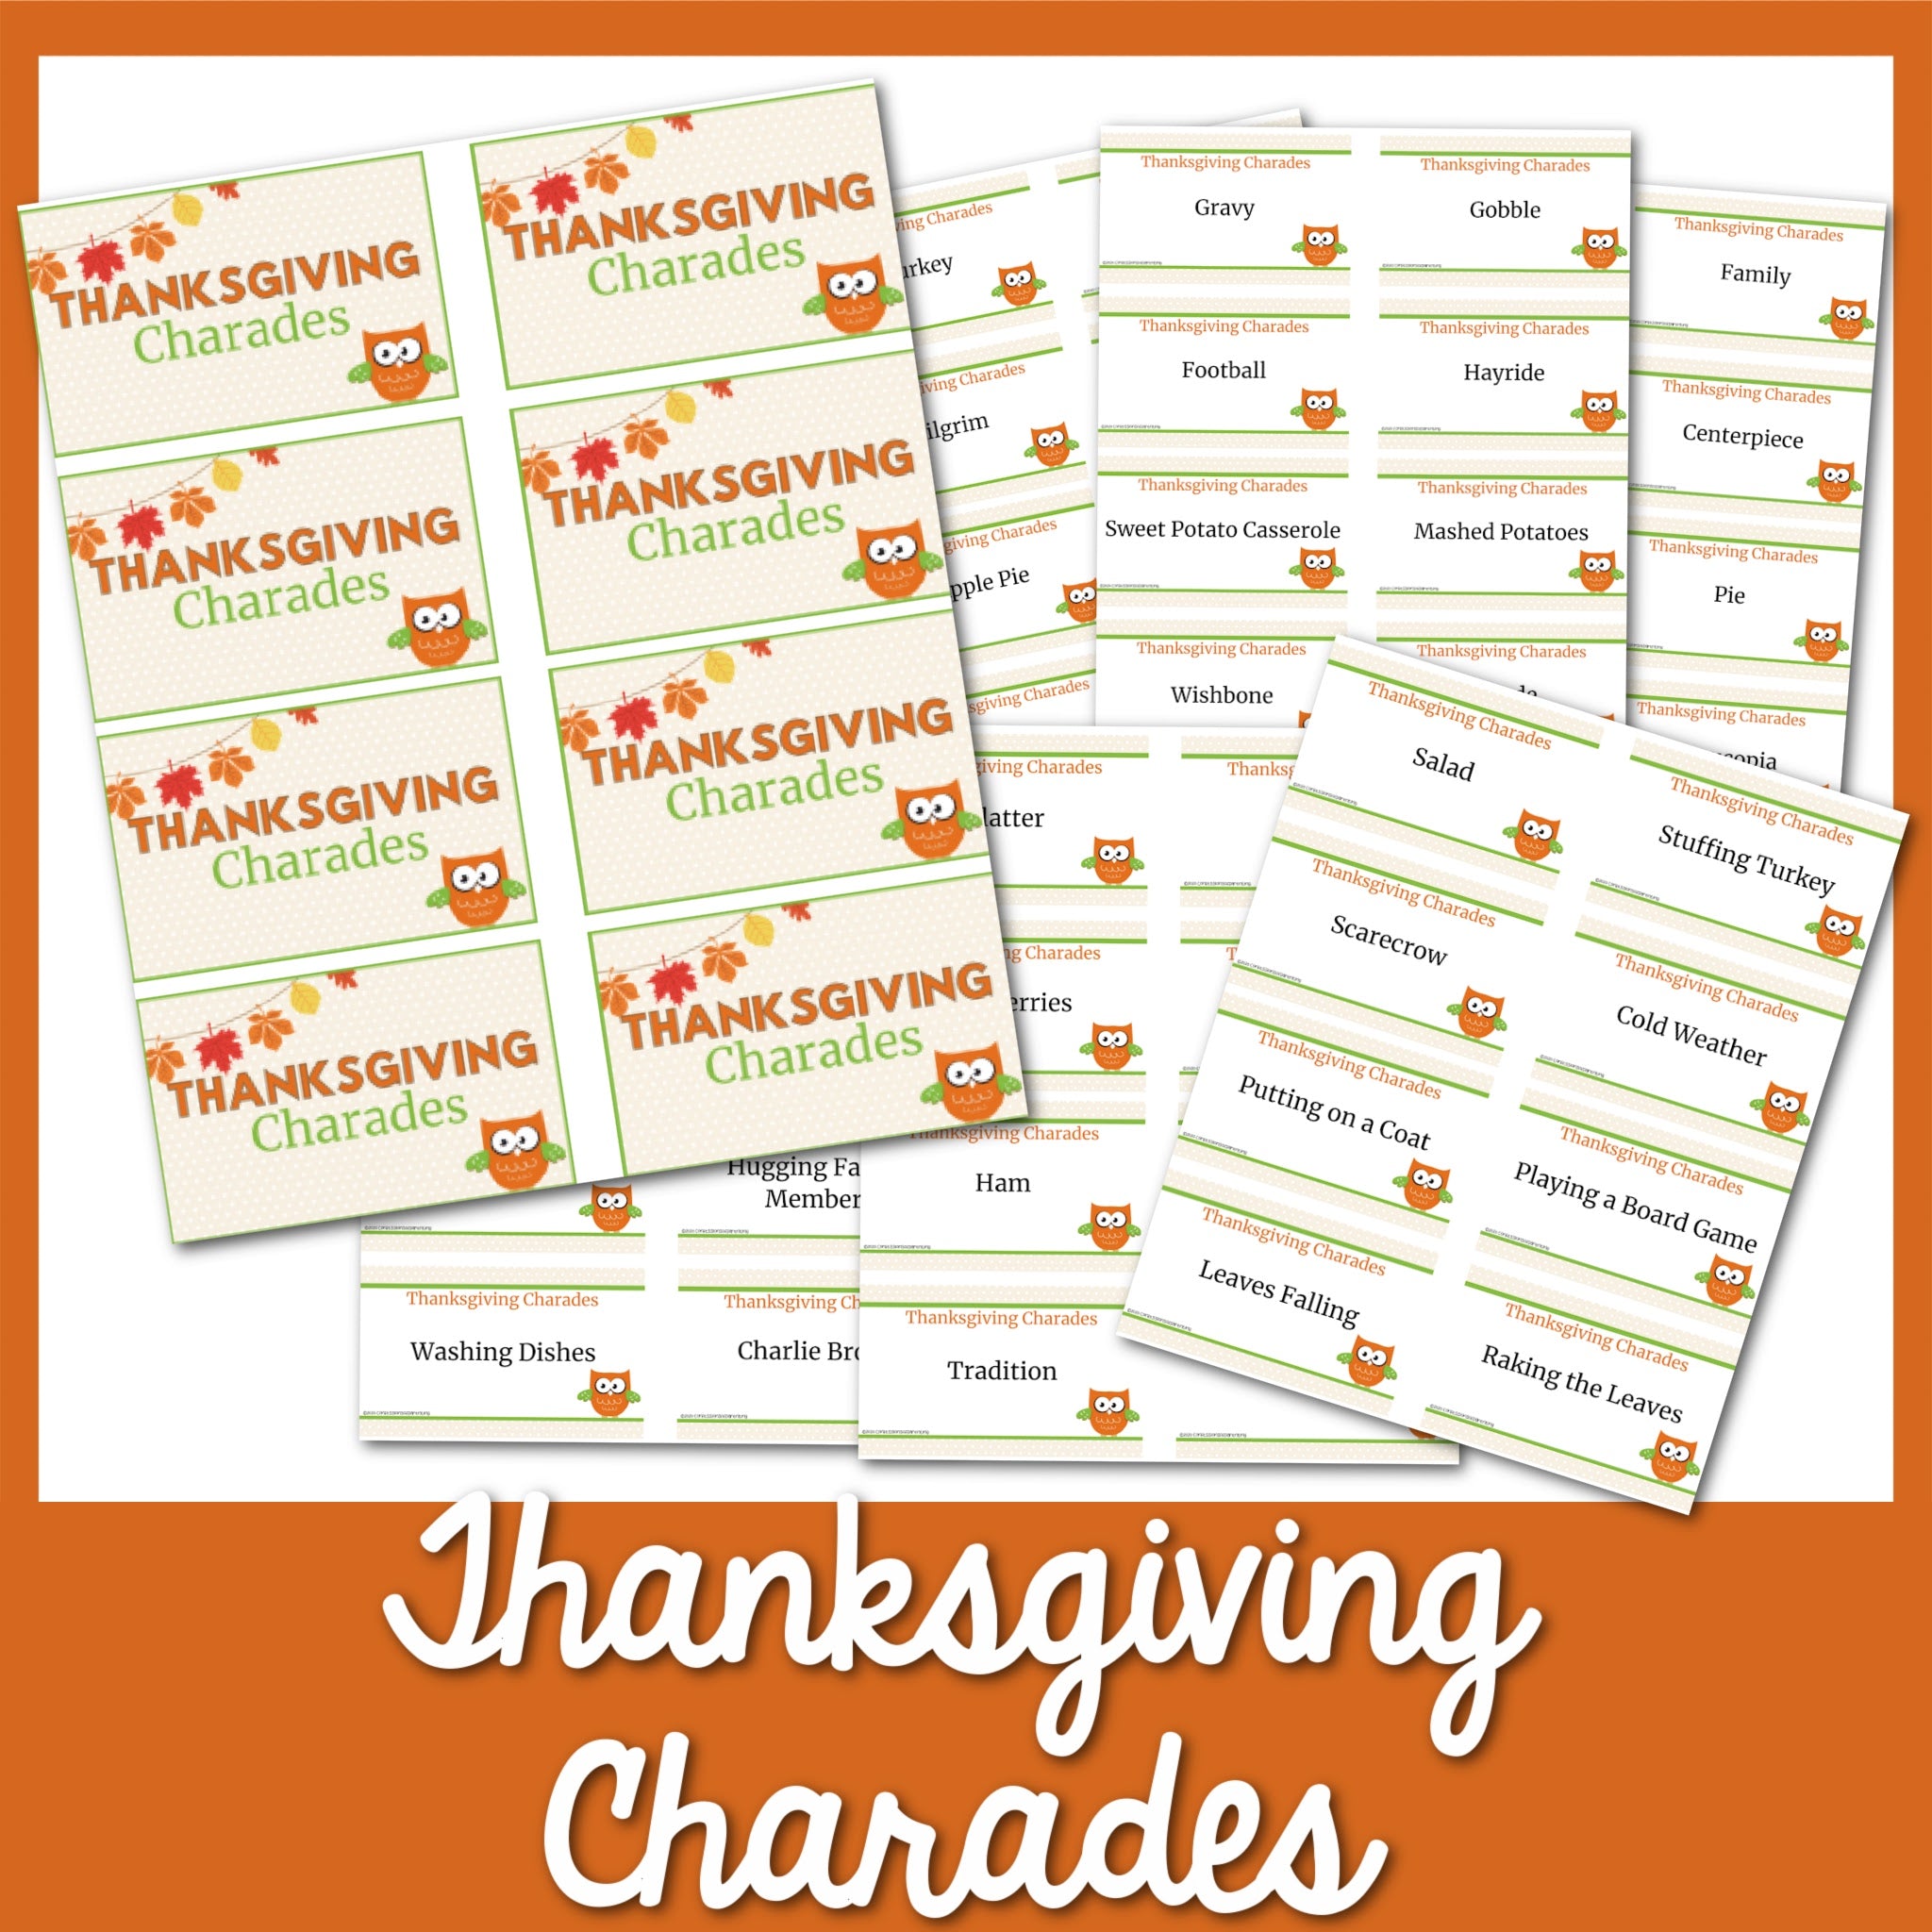 Over 200+ Thanksgiving Charades